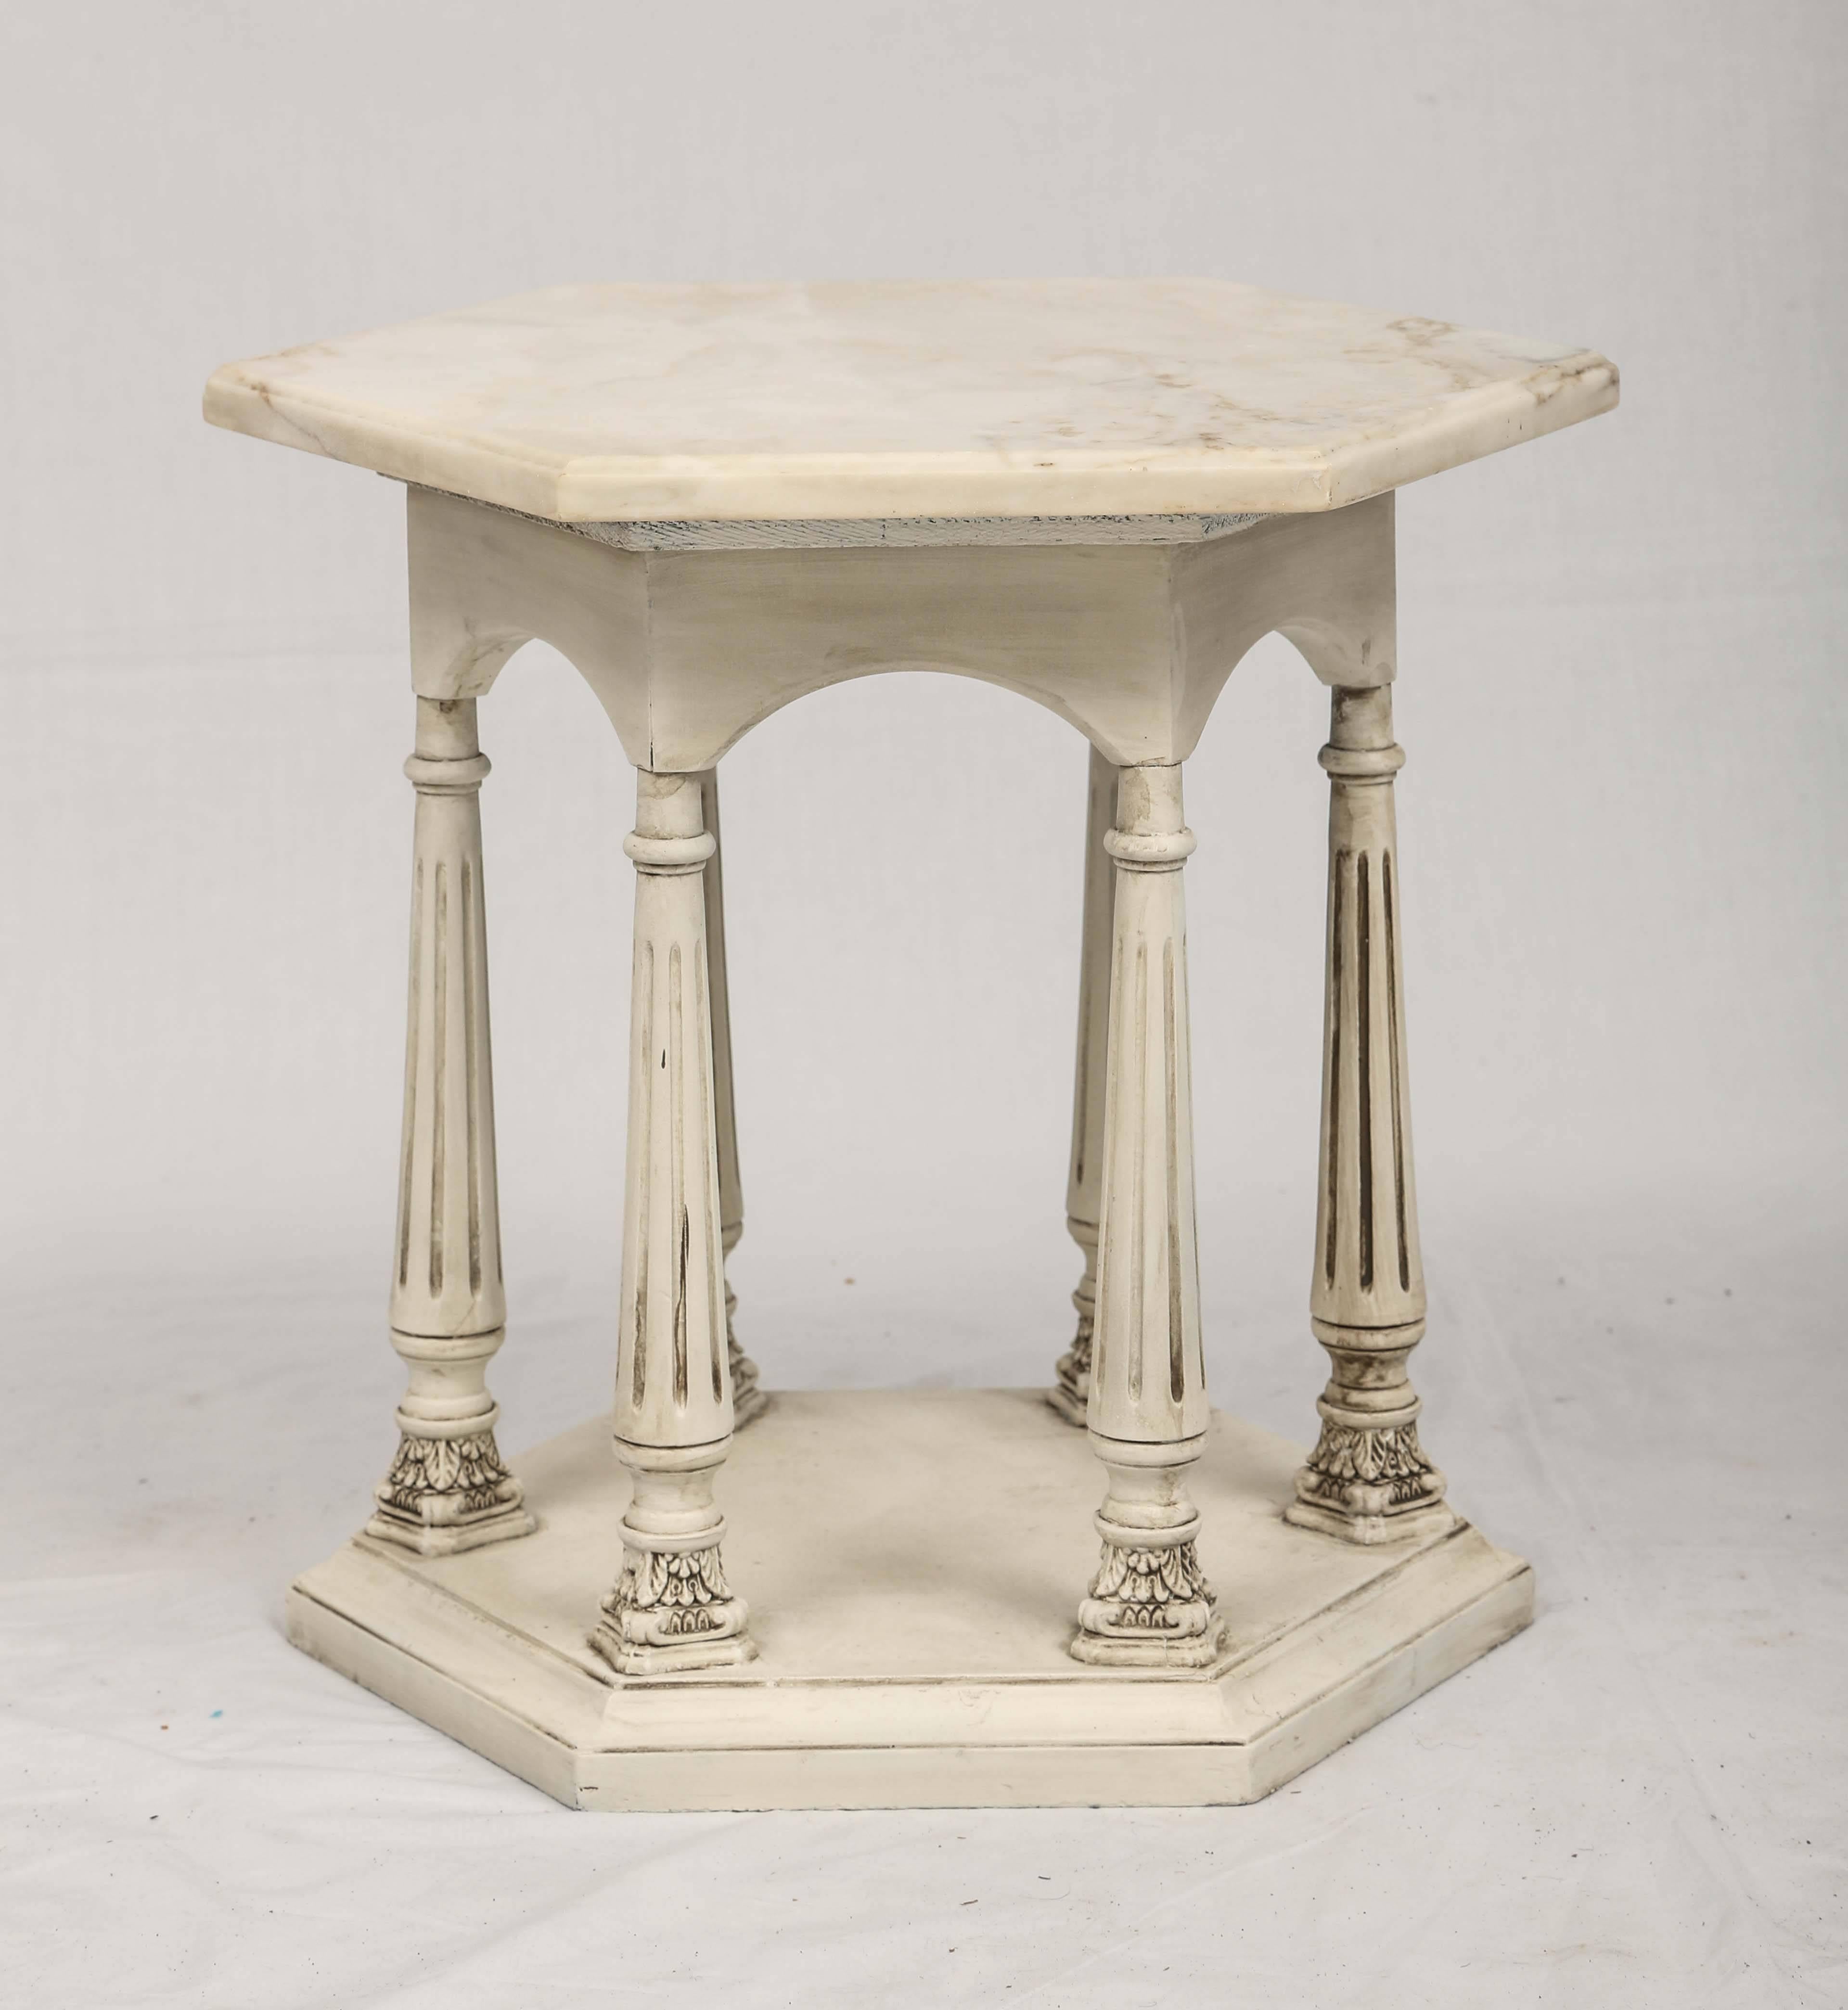 Side table, having an octagonal top of white marble, on carved wood, painted, base, shaped as a colonnade of fluted columns, on molded, conforming base.

Stock ID: D9401